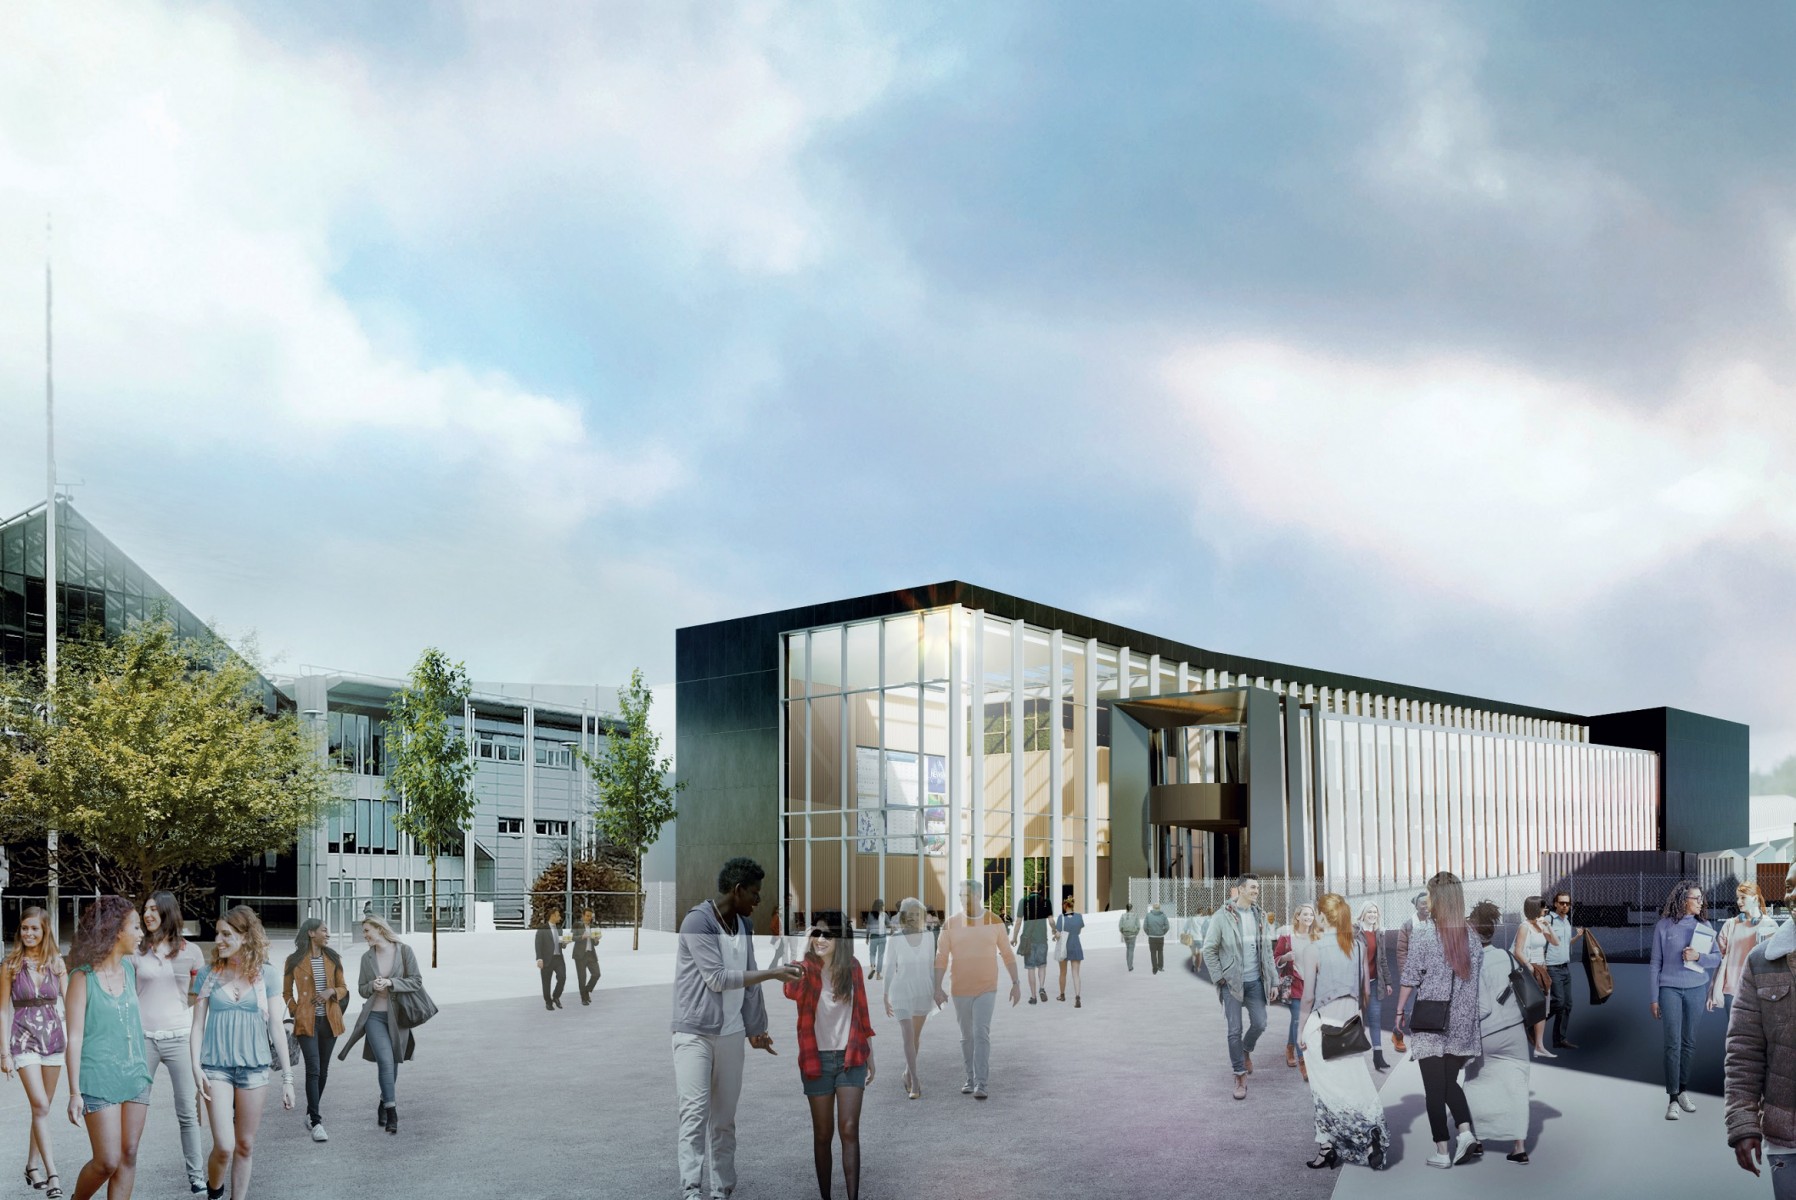 Plans unveiled to enhance gateway to Scottish Event Campus